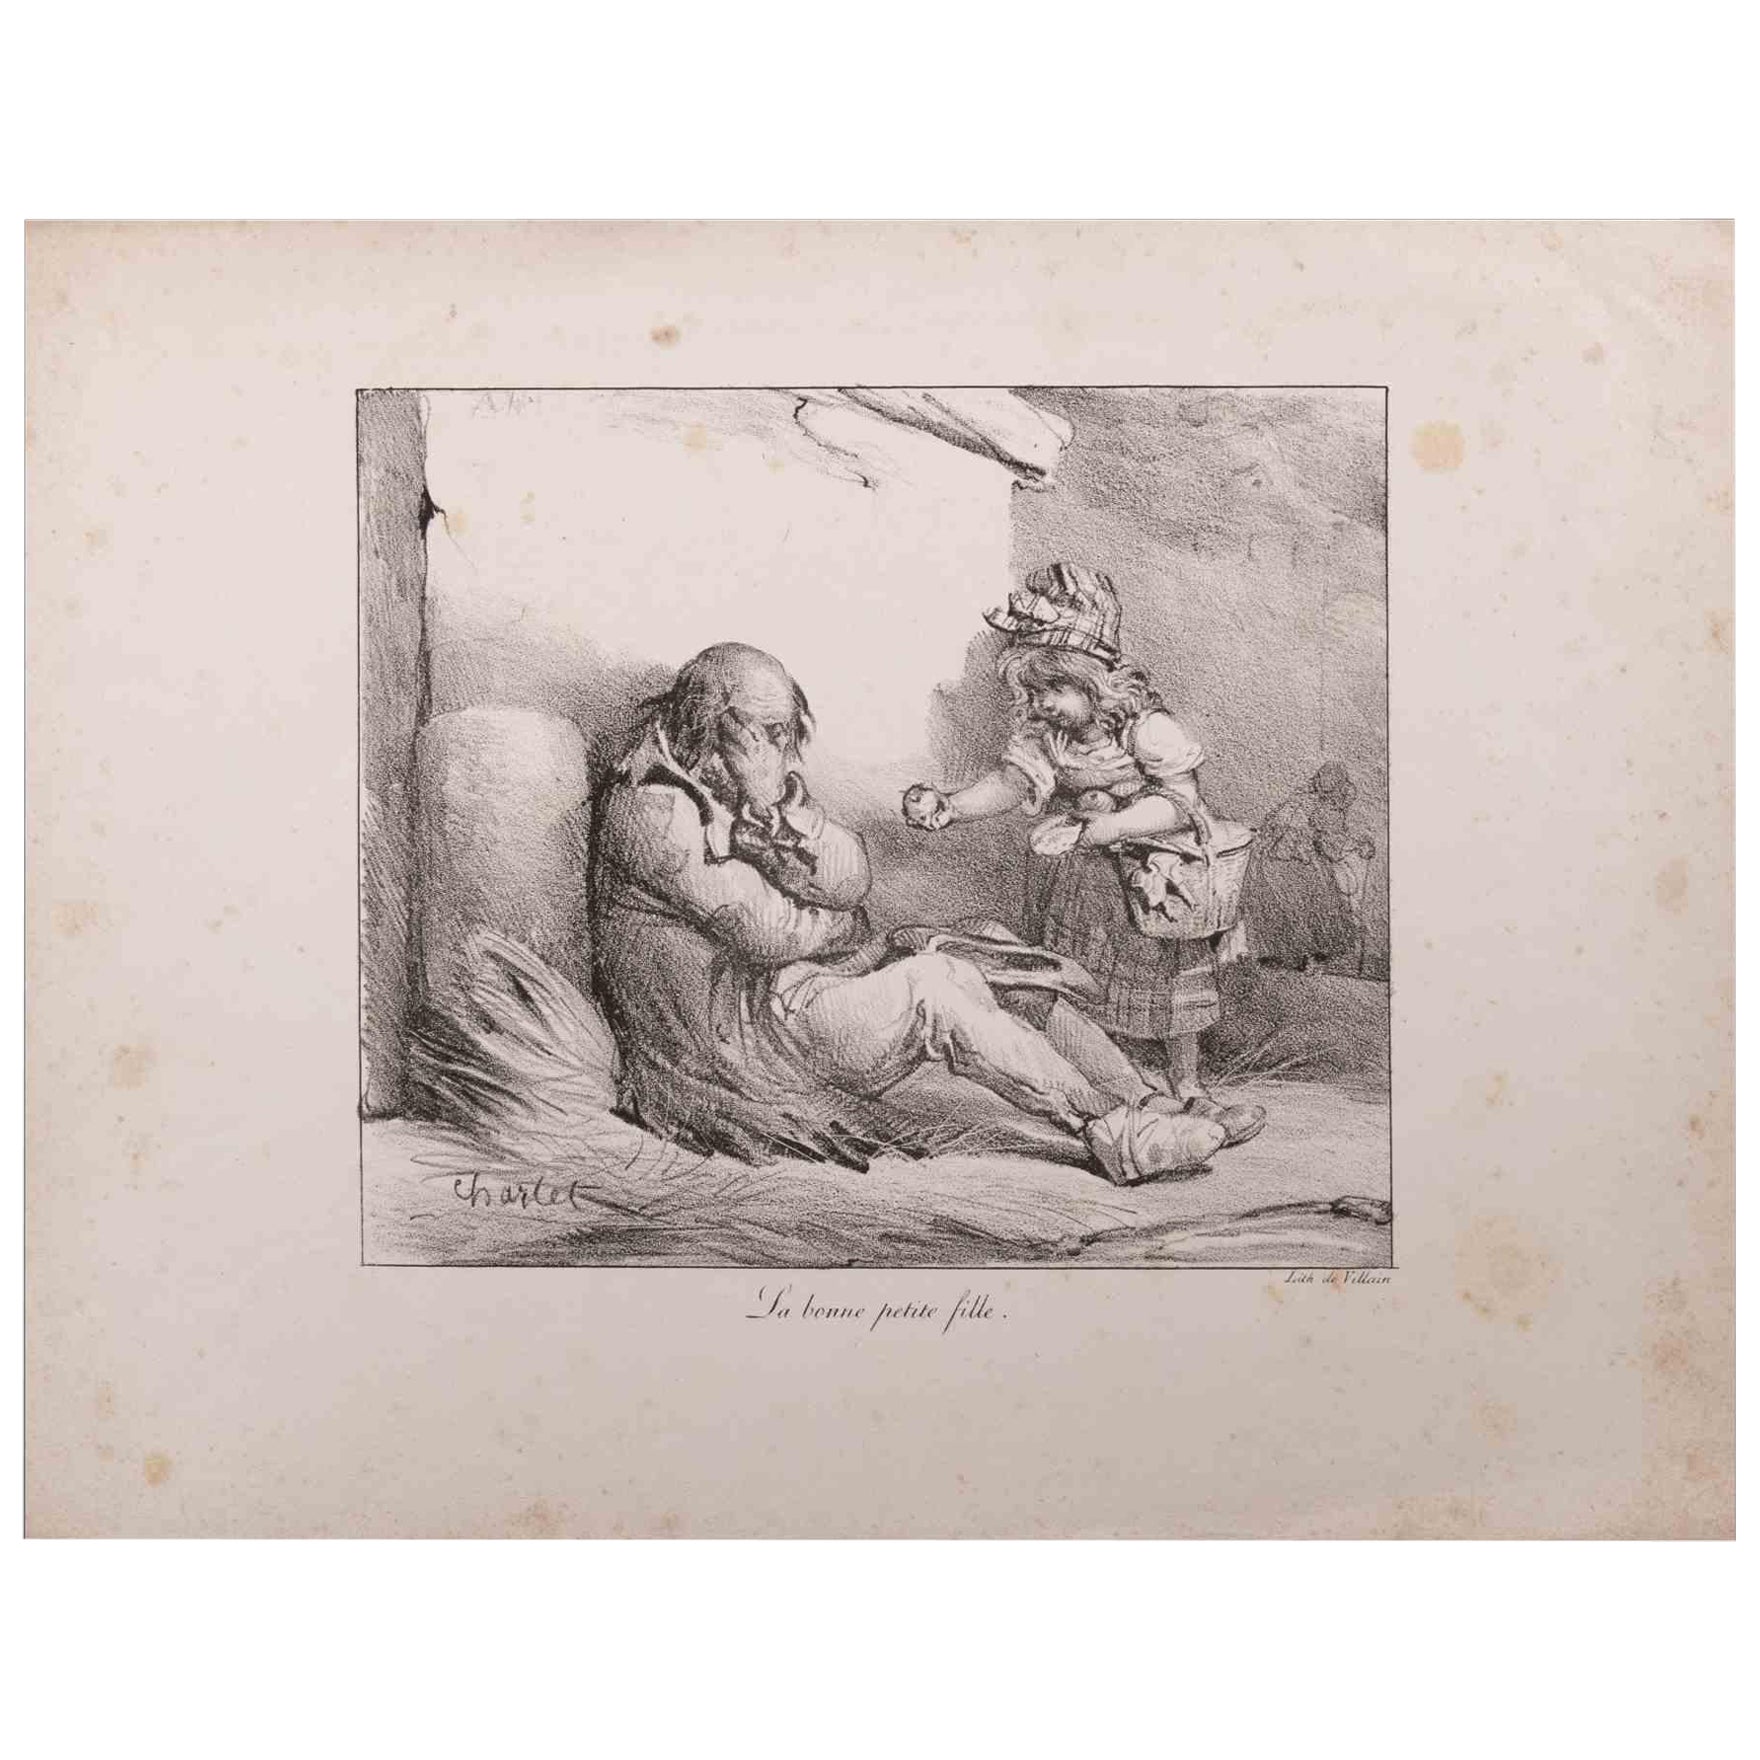 La Bonne petite fille is an Original Lithograph realized by Nicolas Toussaint Charlet (1792-1845).

Signed on the plate. Titled on the lower.

Good condition with some foxing and small cutting.

Nicolas Toussaint Charlet (20 December 1792 – 30